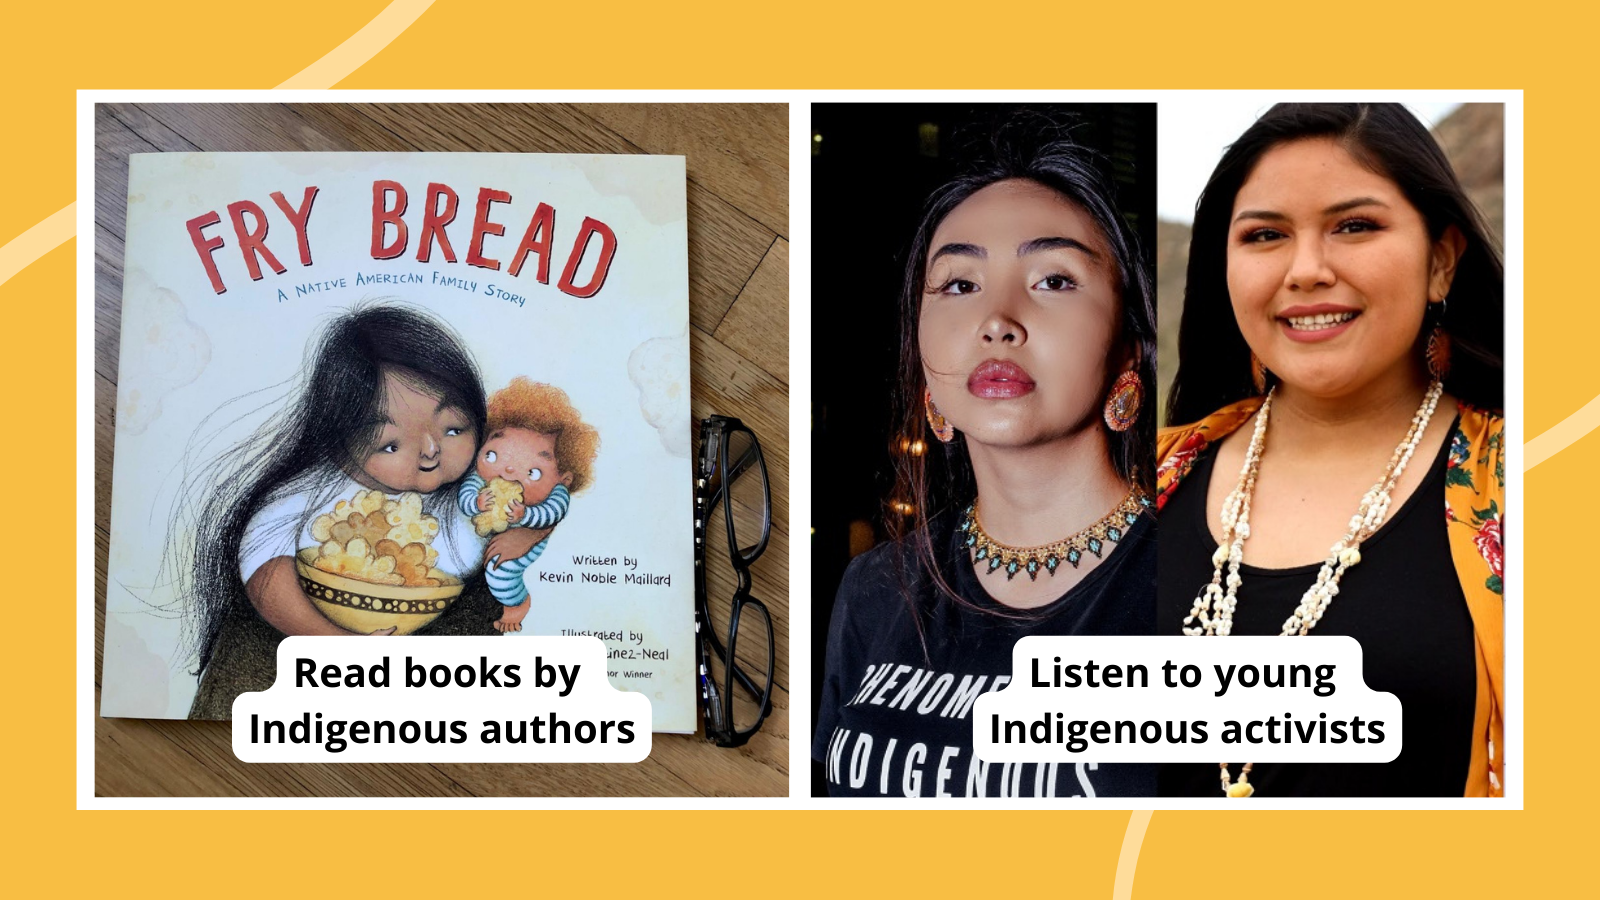 Activities to honor Indigenous Peoples Day in the classroom including photo of two young indigenous women activists for a student webinar and Fry Bread picture book cover by indigenous author.